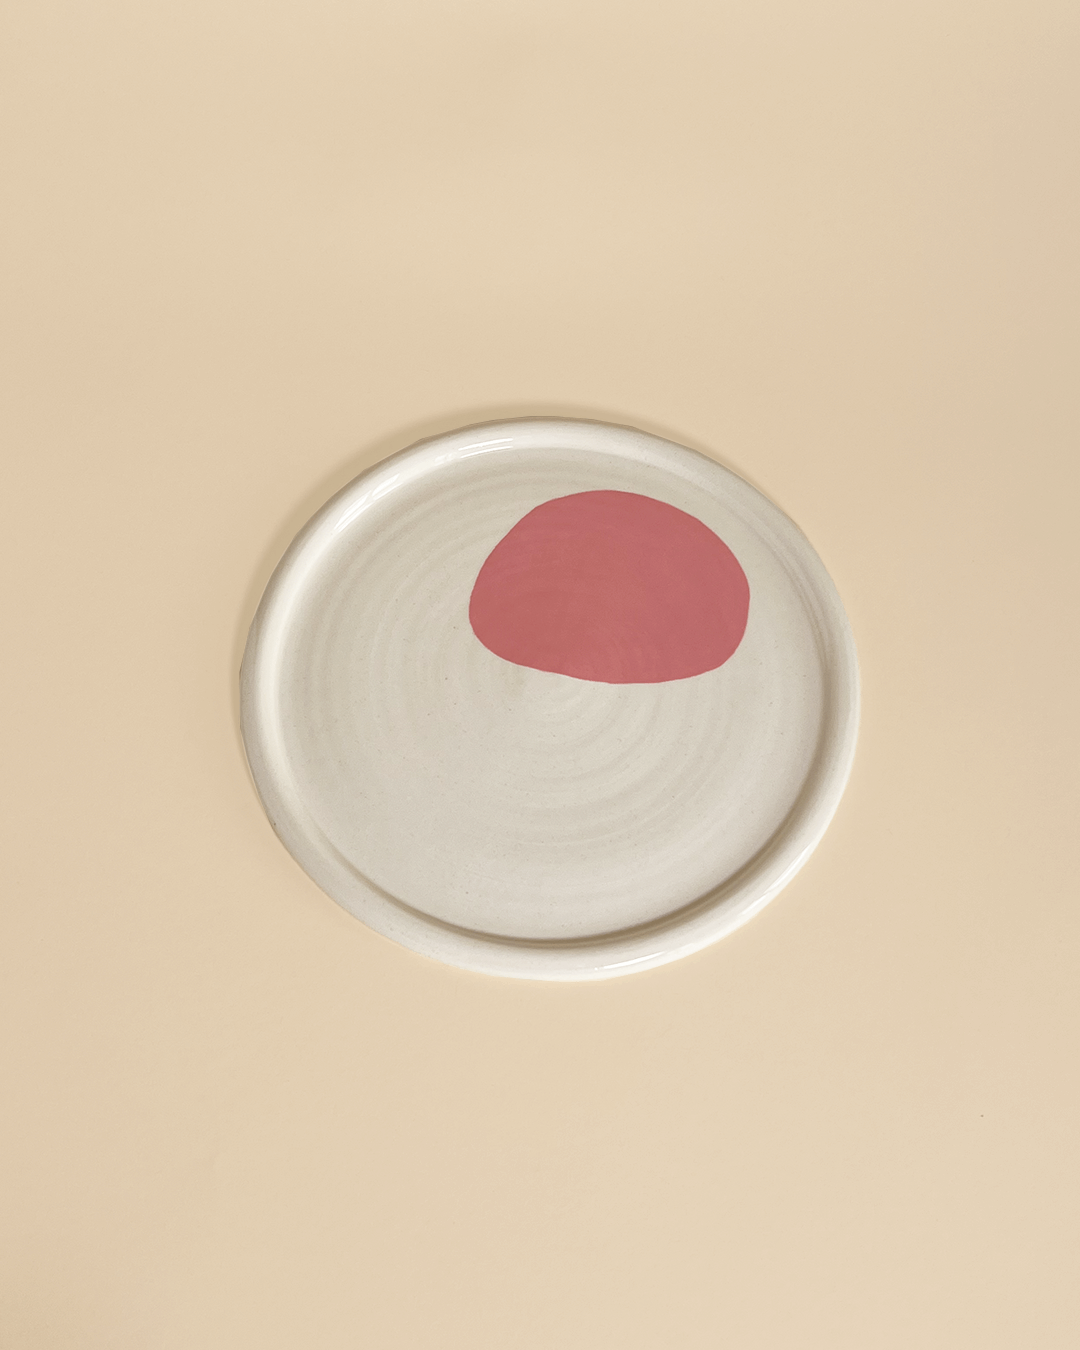 The dotted ceramic plate by Laura Liza is ideal for breakfast, apéro or snack-time whenever you crave it. The color highlights give the plates a unique touch. The dotted ceramic plate fits perfectly with the chunky ceramic mug and highlights a fine breakfast table.